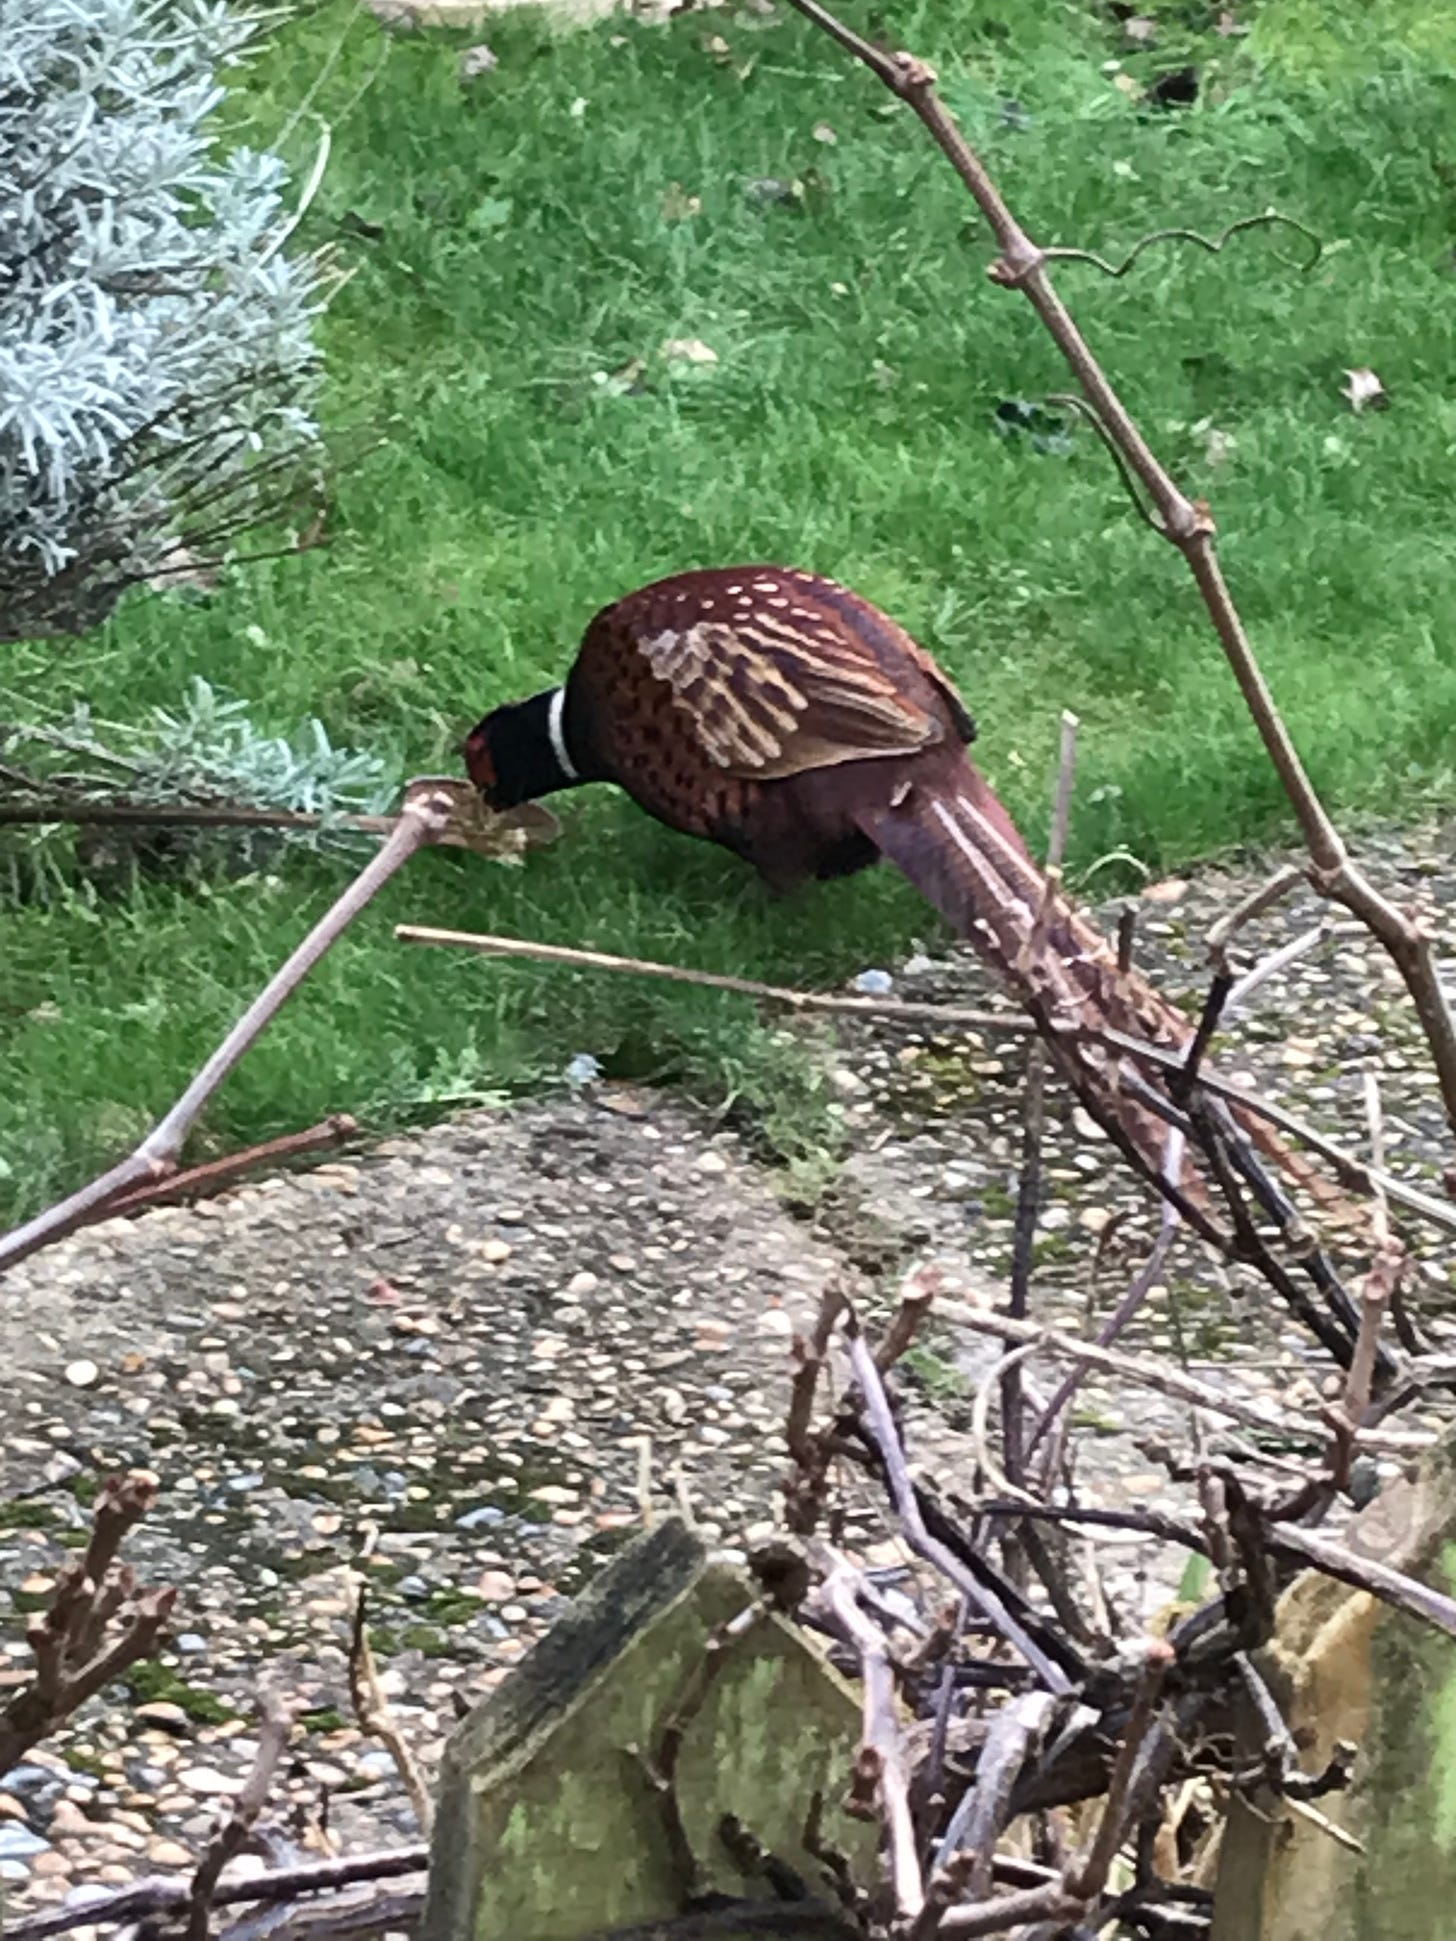 a pheasant eating seed from the ground, standing on the grassy lawn in front of a rough concrete path